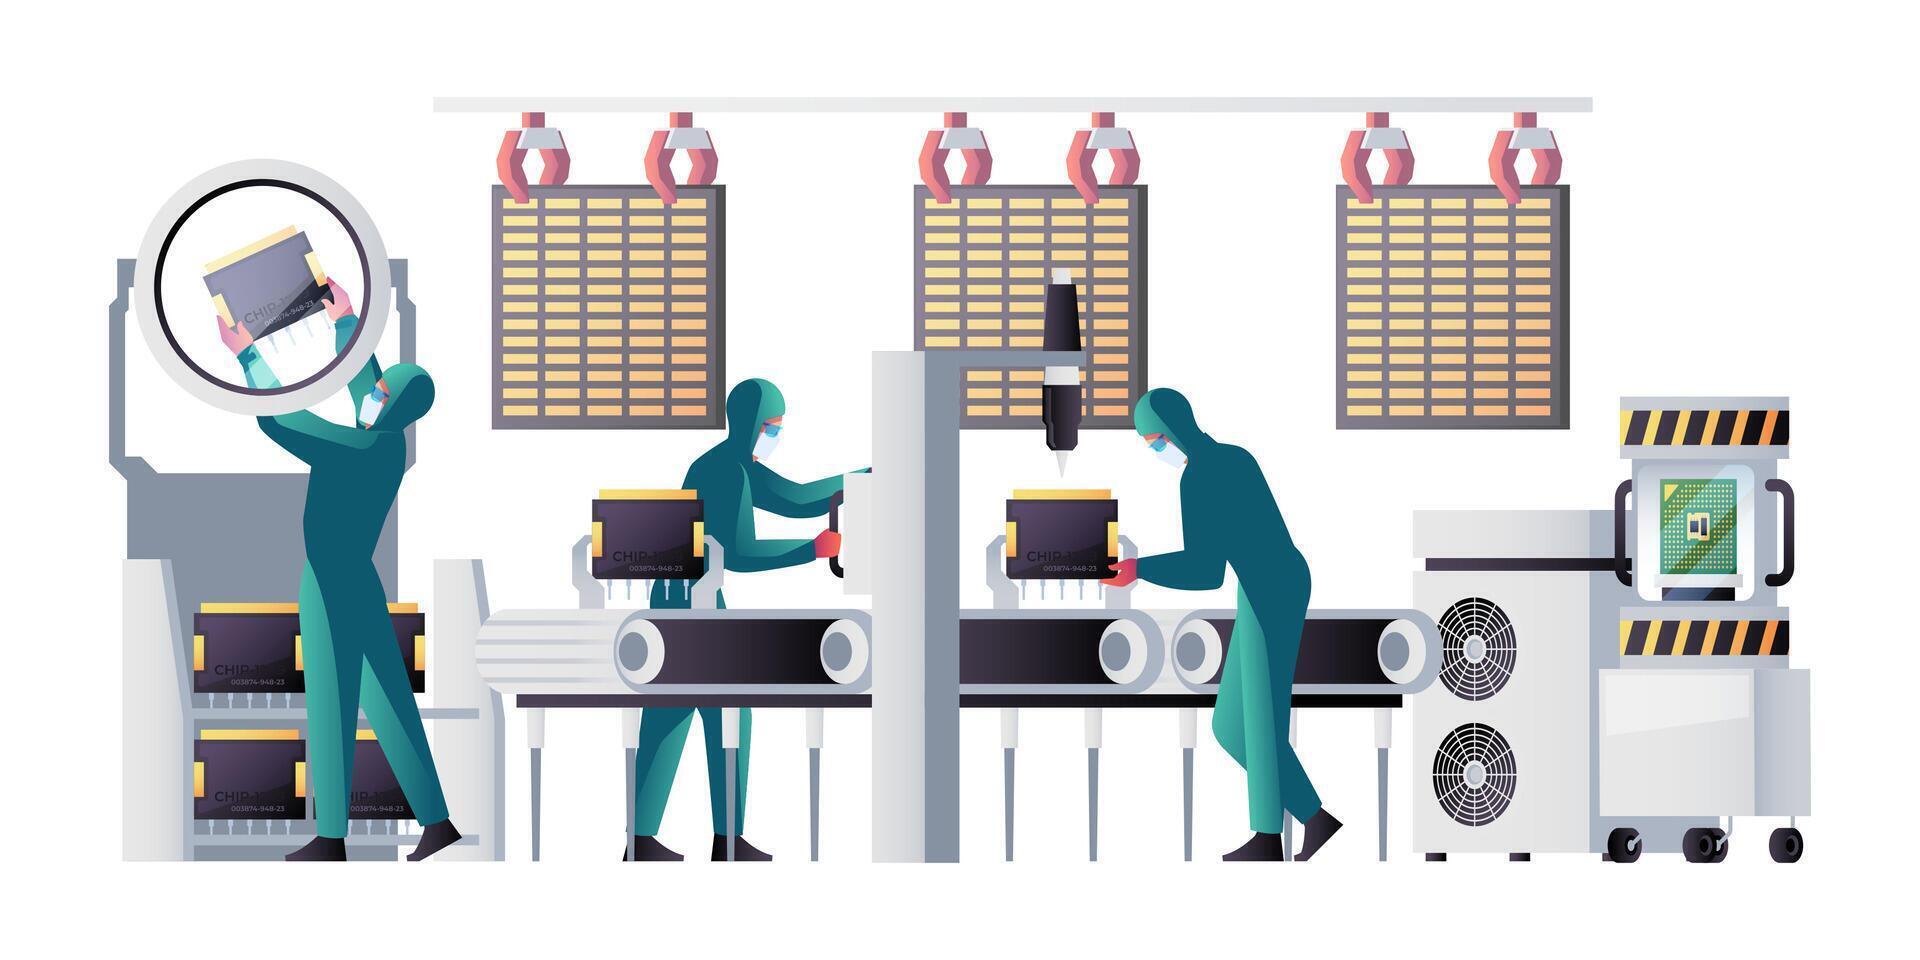 Semiconductor manufacturing process. Circuits boards components production with assembly line and workers, innovation technology concept. Vector illustration